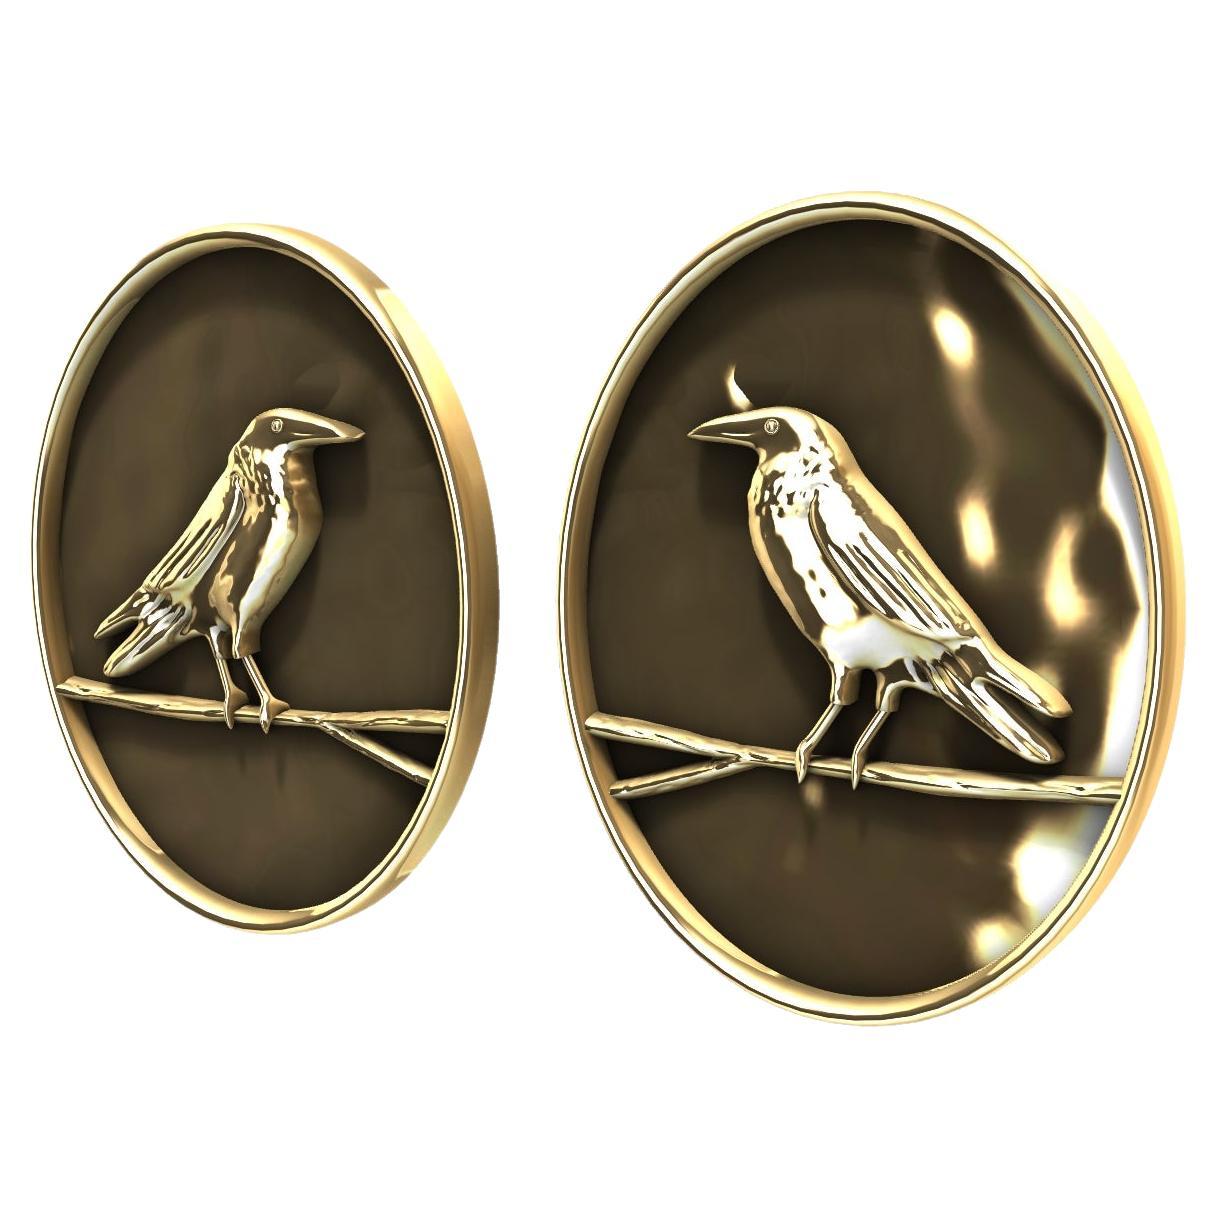 18 Karat Yellow Gold Raven Stud Earrings Tiffany Designer, Thomas Kurilla has loved sculpting . Waiting on a branch to hunt from above. Patience rules .
 Raven stud earrings to go from day to evening without flying away. 12.44 mm x 15.87
 made to